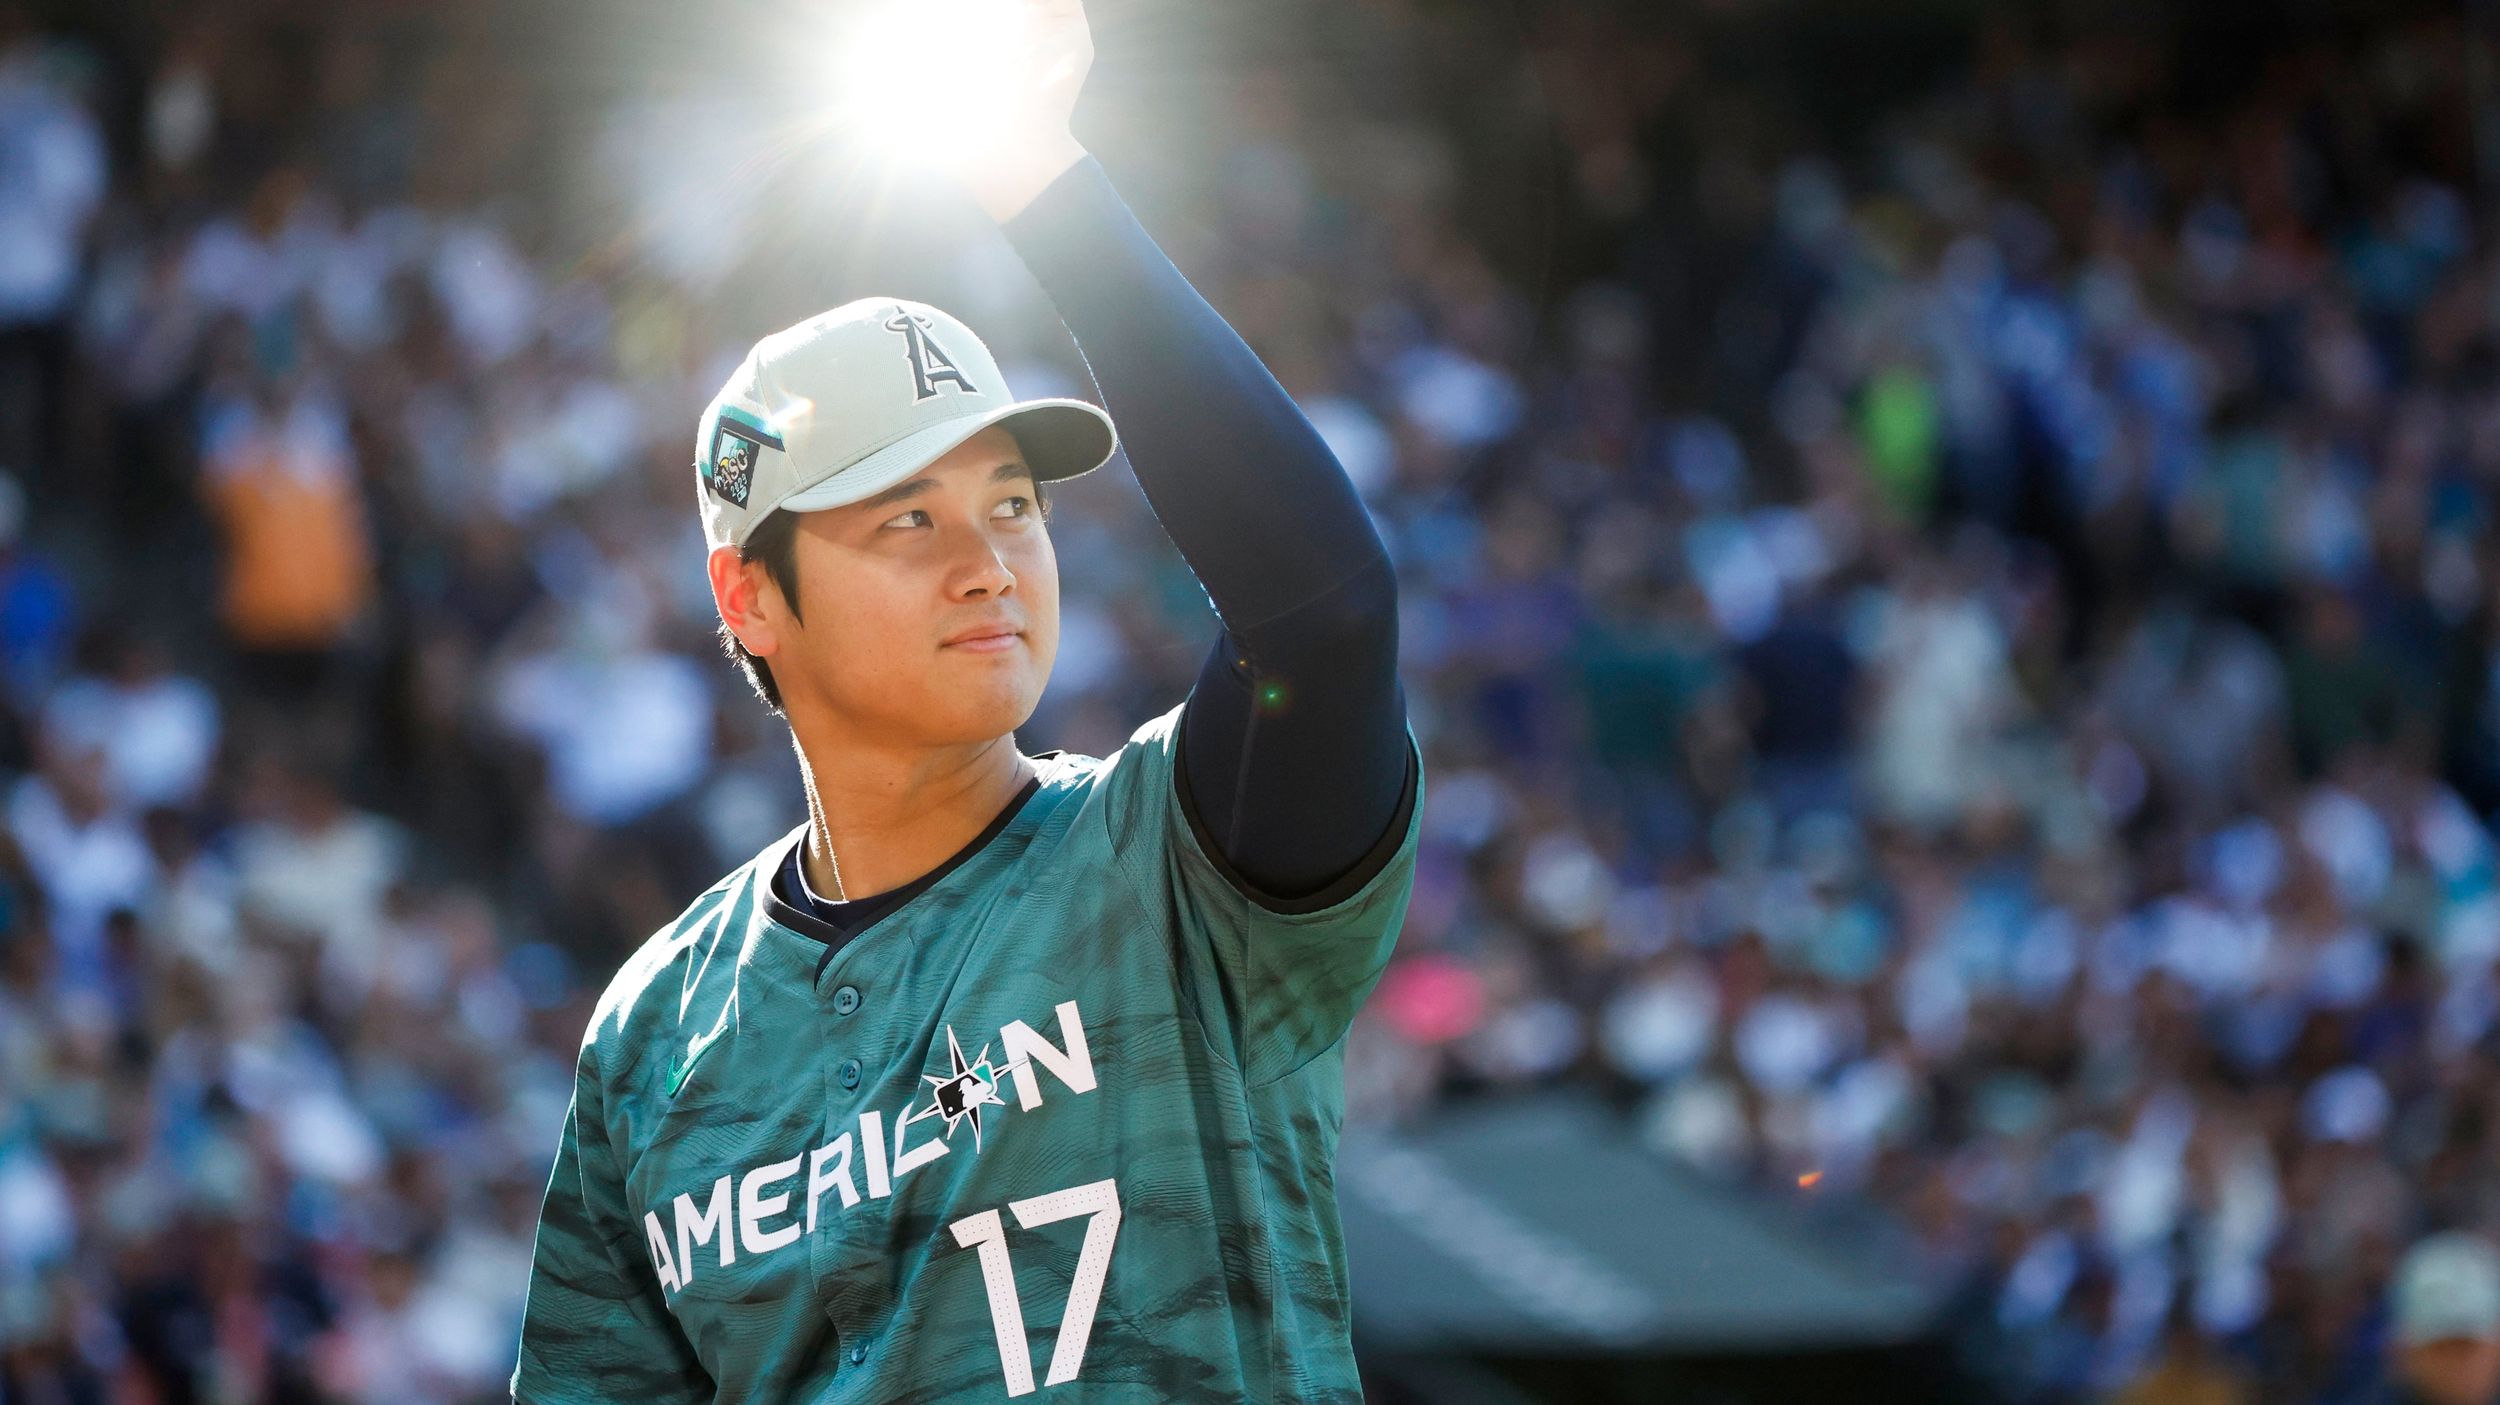 Baseball: Mariners fans woo Shohei Ohtani at All-Star game in Seattle